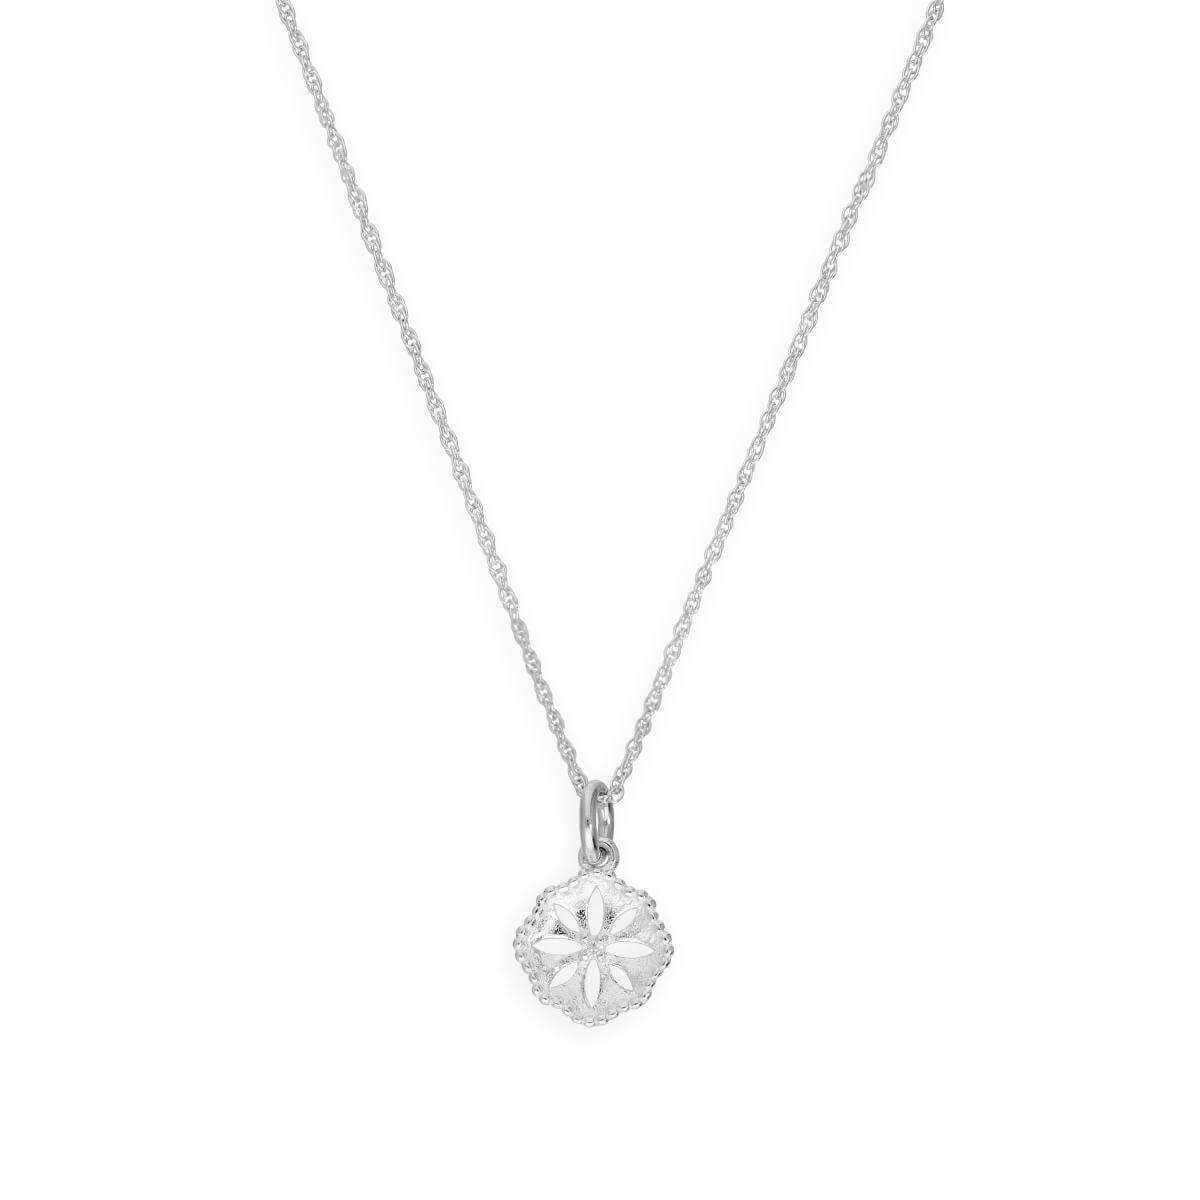 Sterling Silver Cut Out Flower Pendant Necklace 16 - 22 Inches